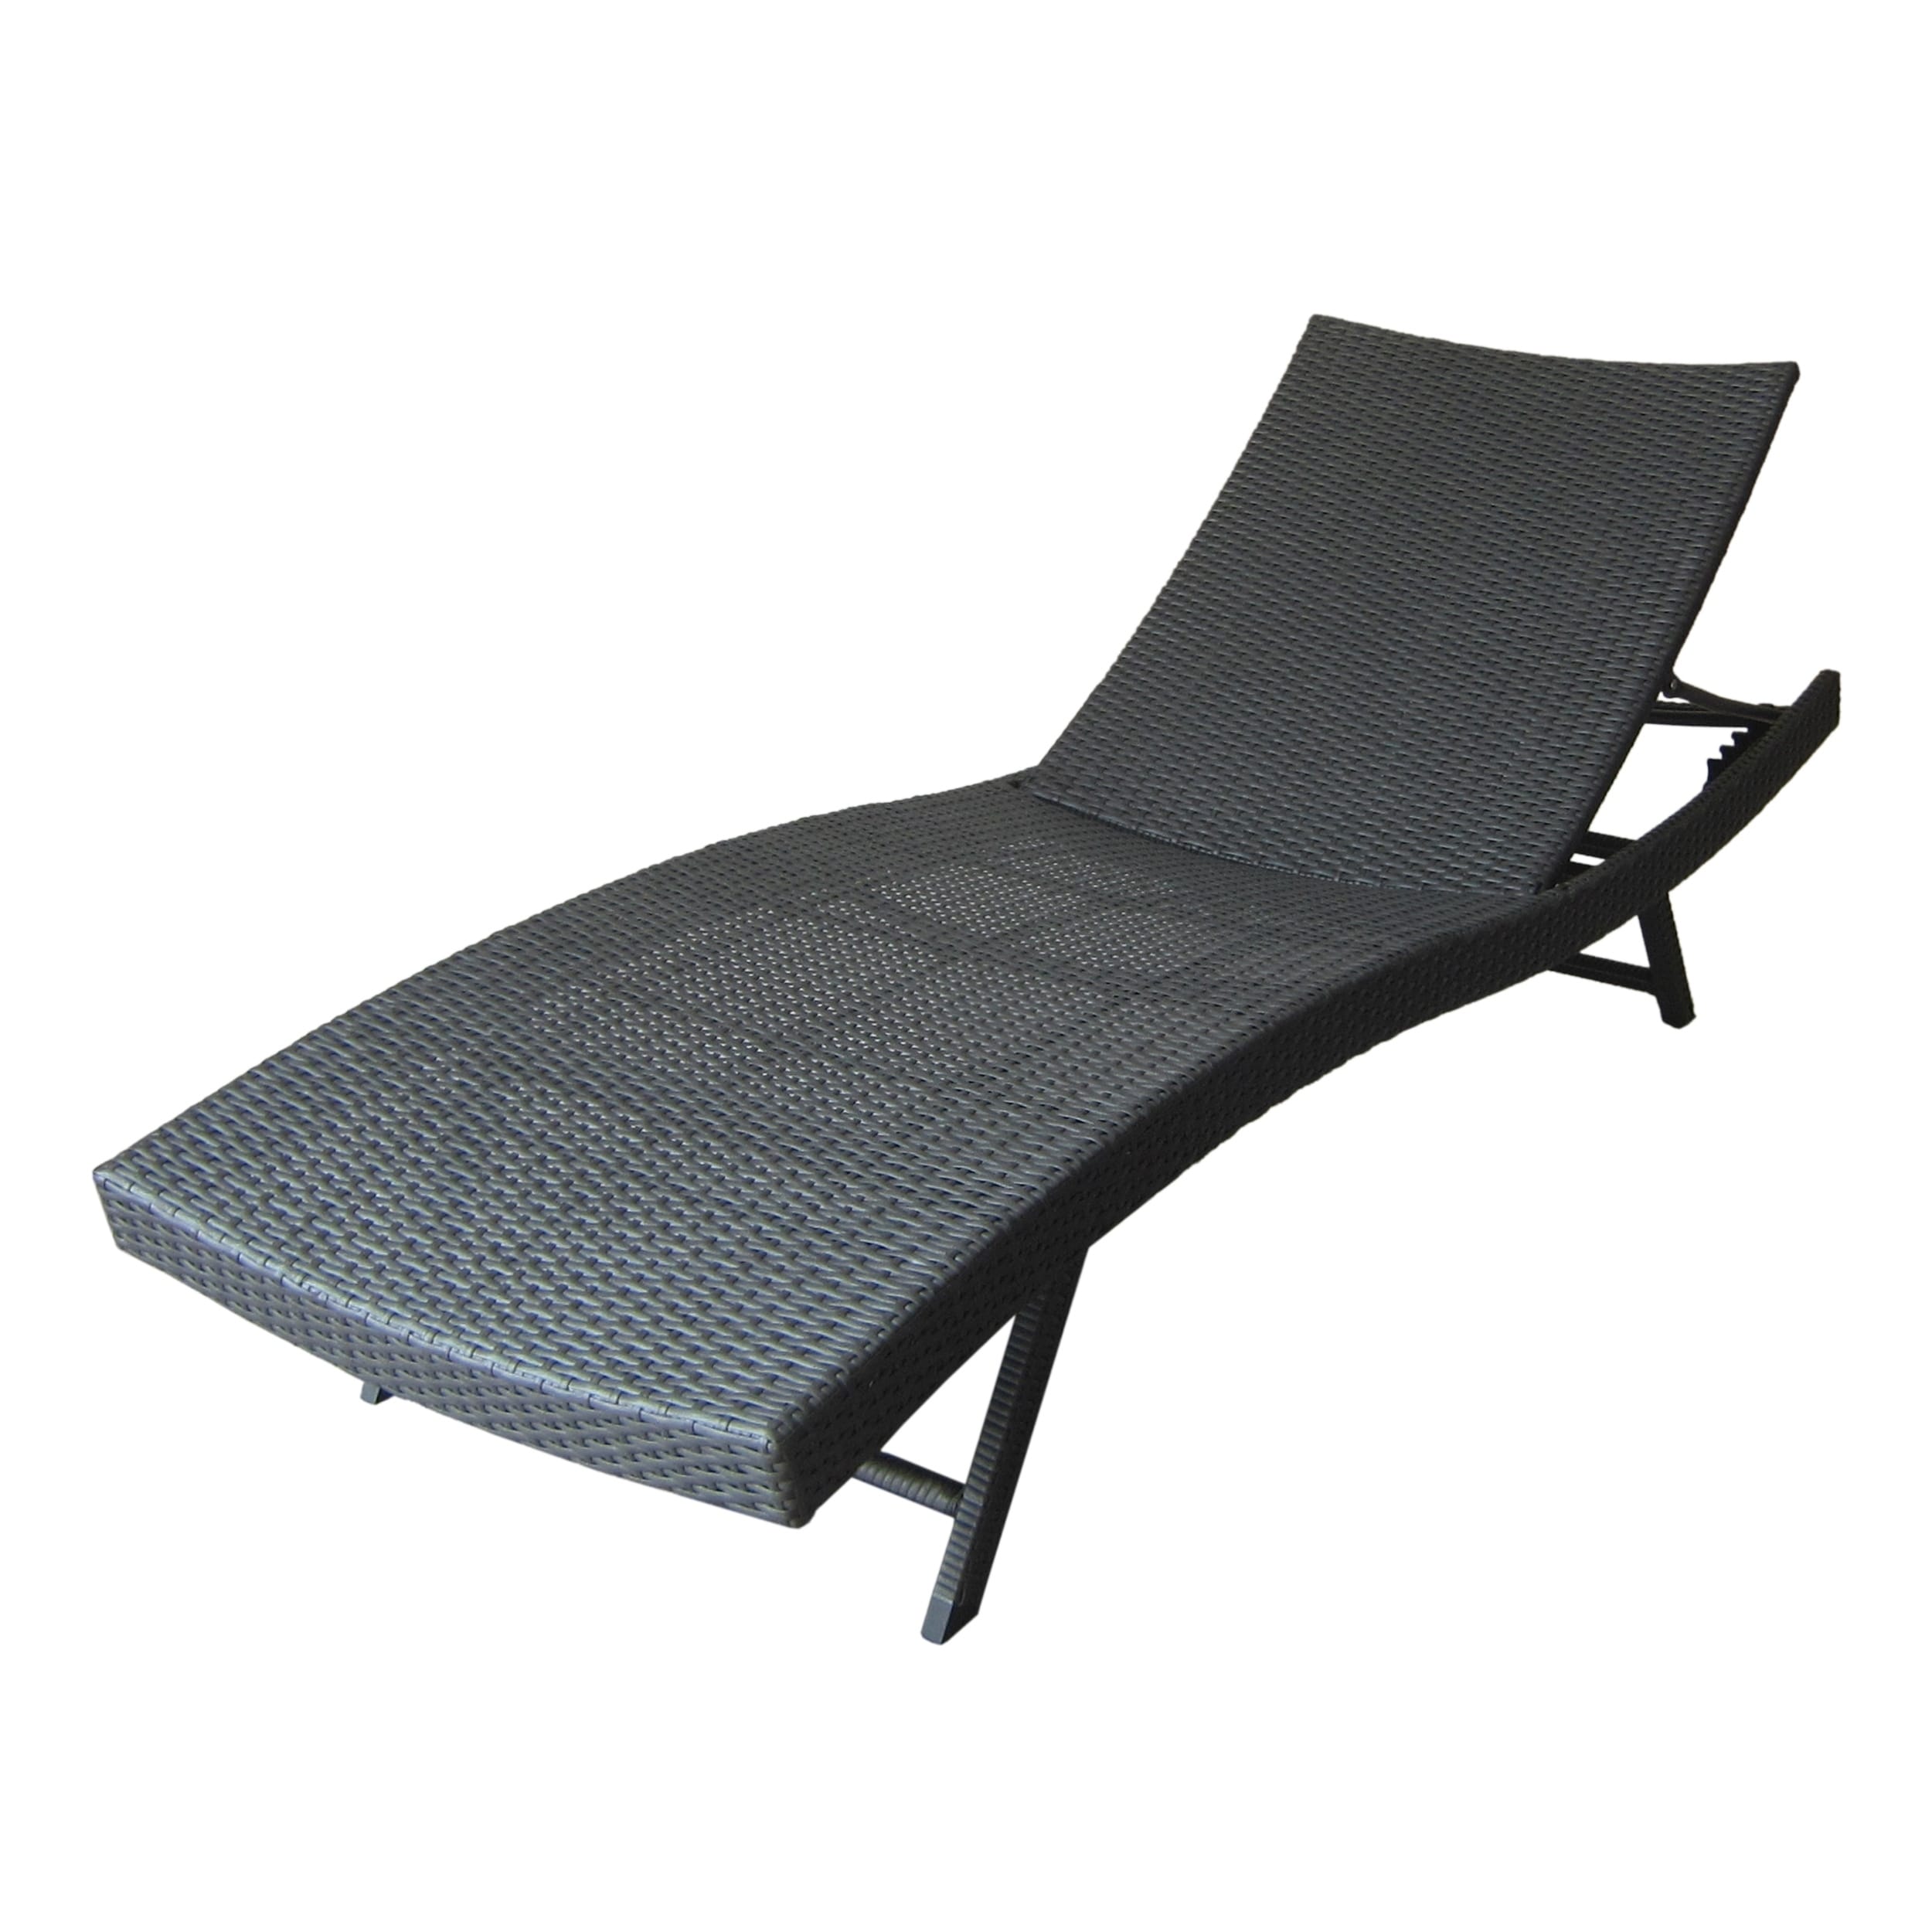 Kauai Outdoor Wicker Chaise Lounge By Christopher Knight Home